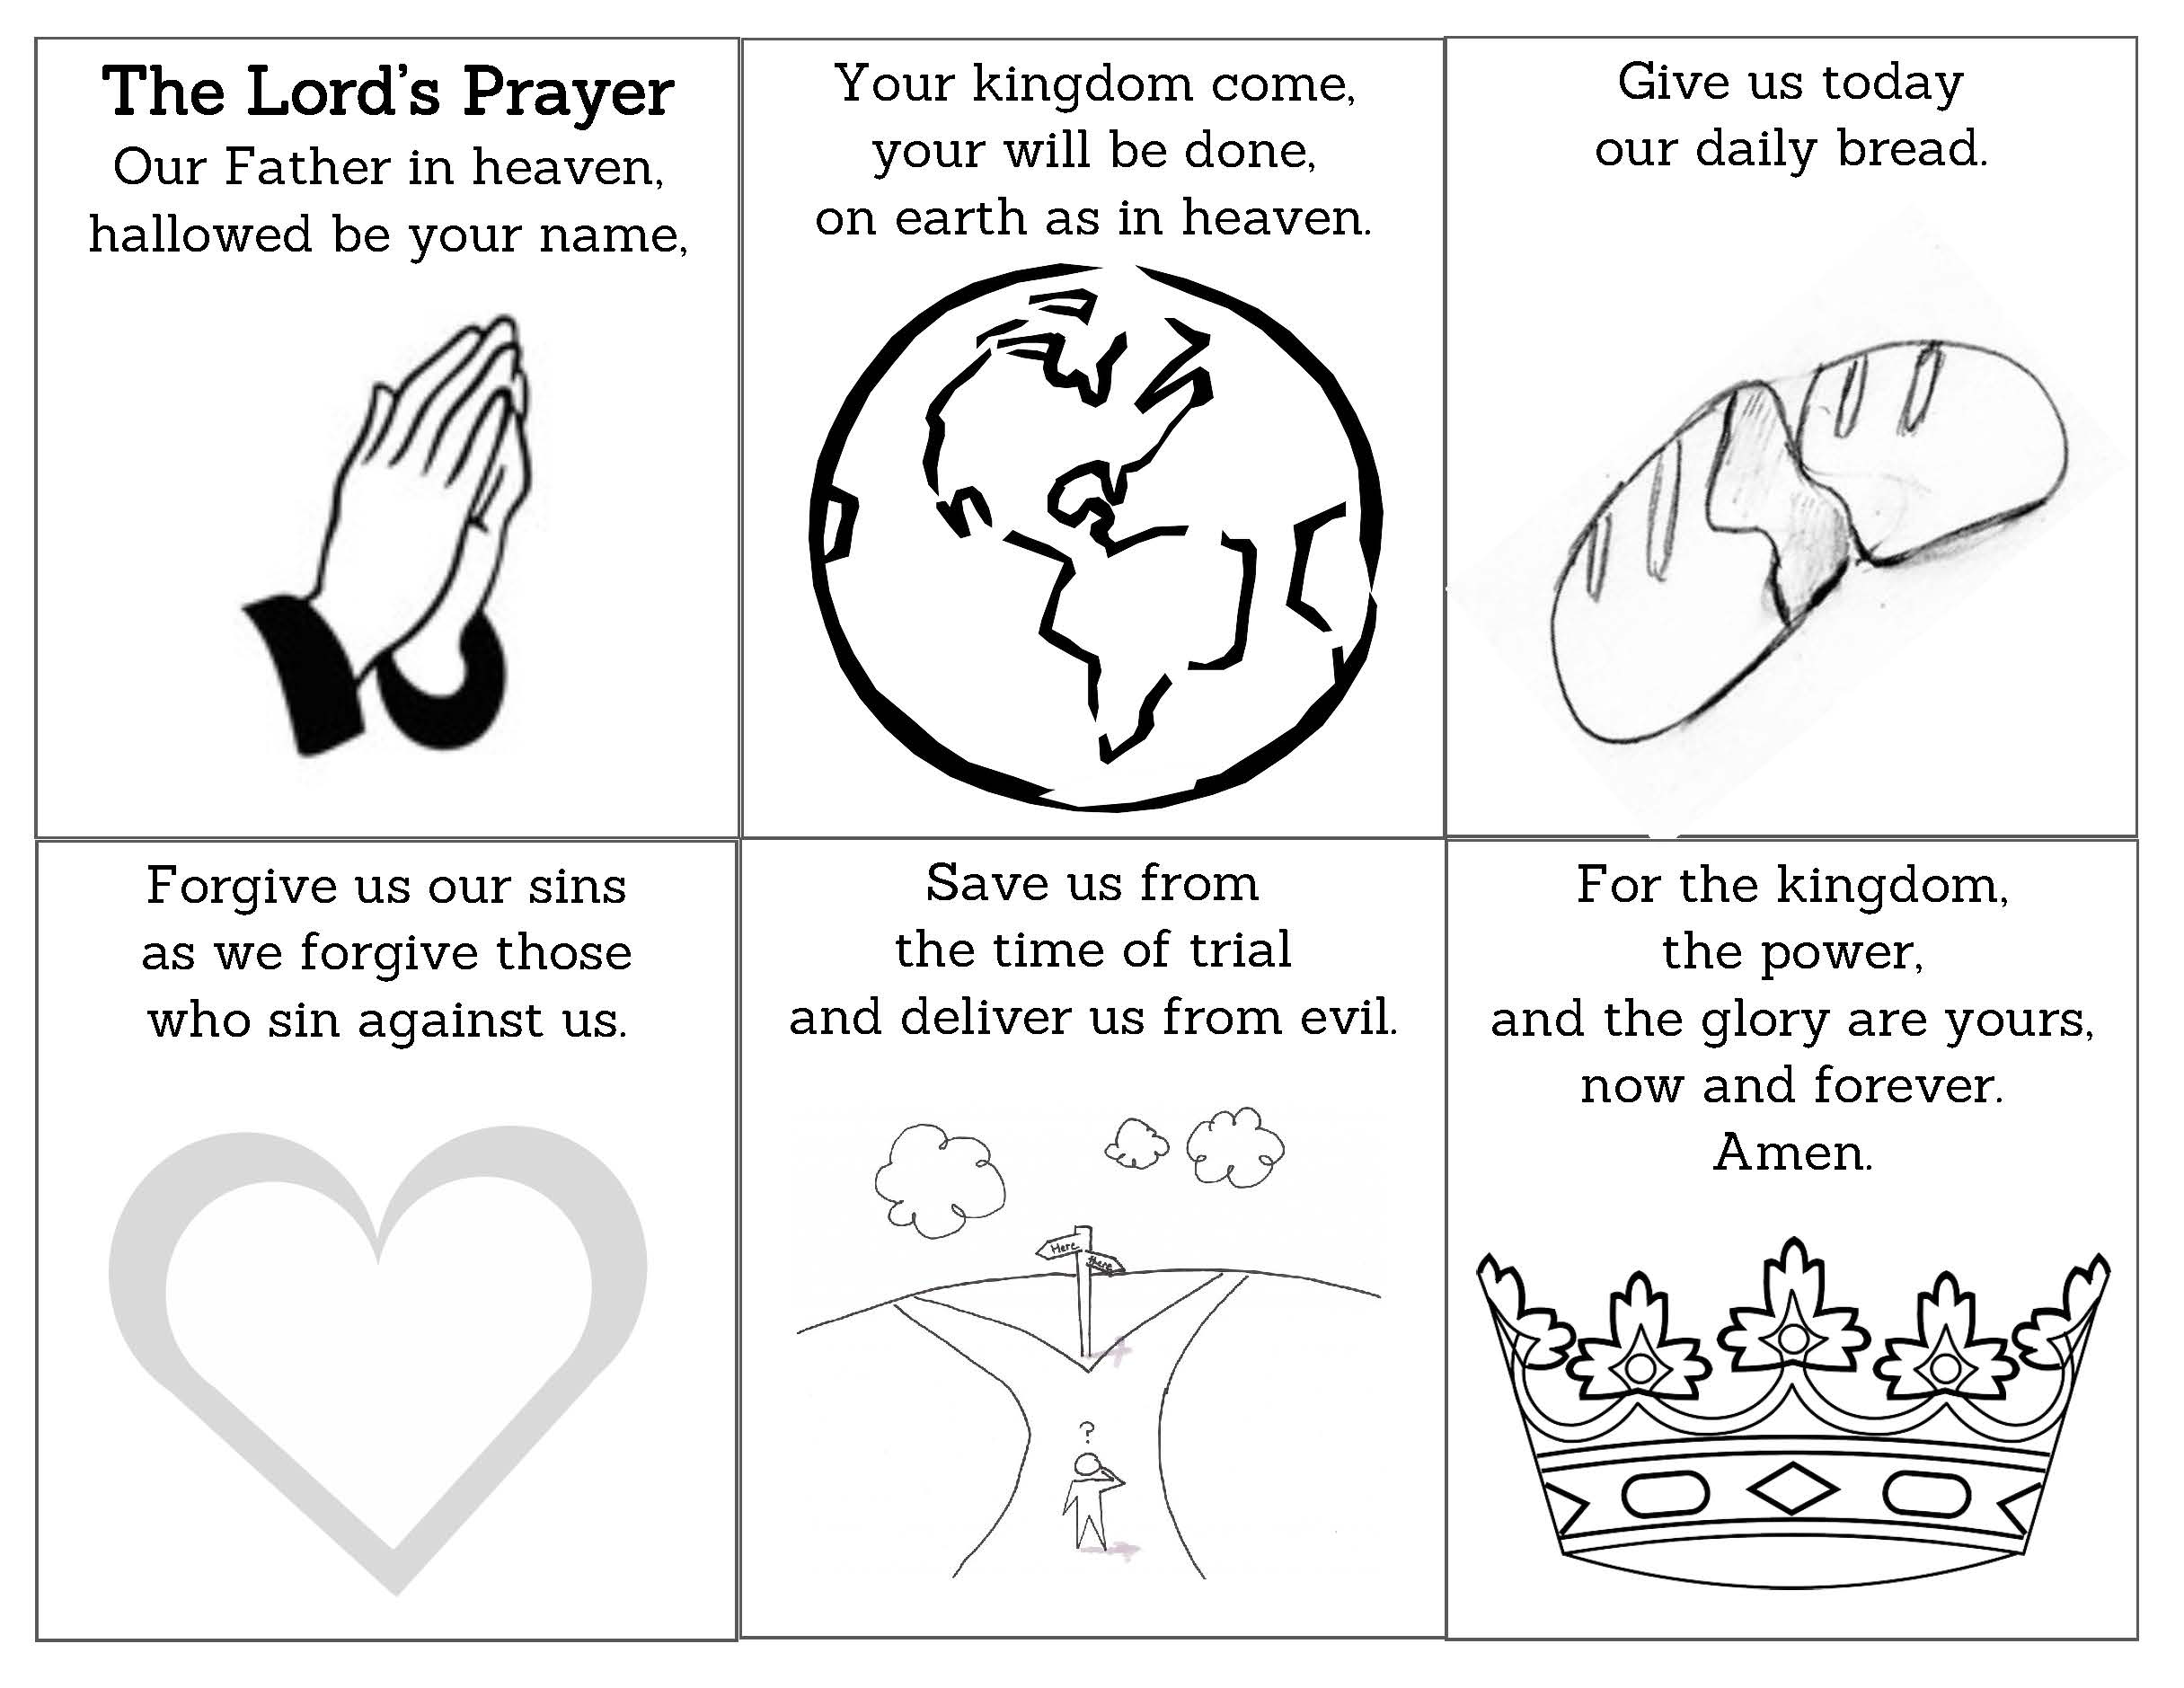 lord-s-prayer-coloring-activity-concordia-lutheran-church-chicago